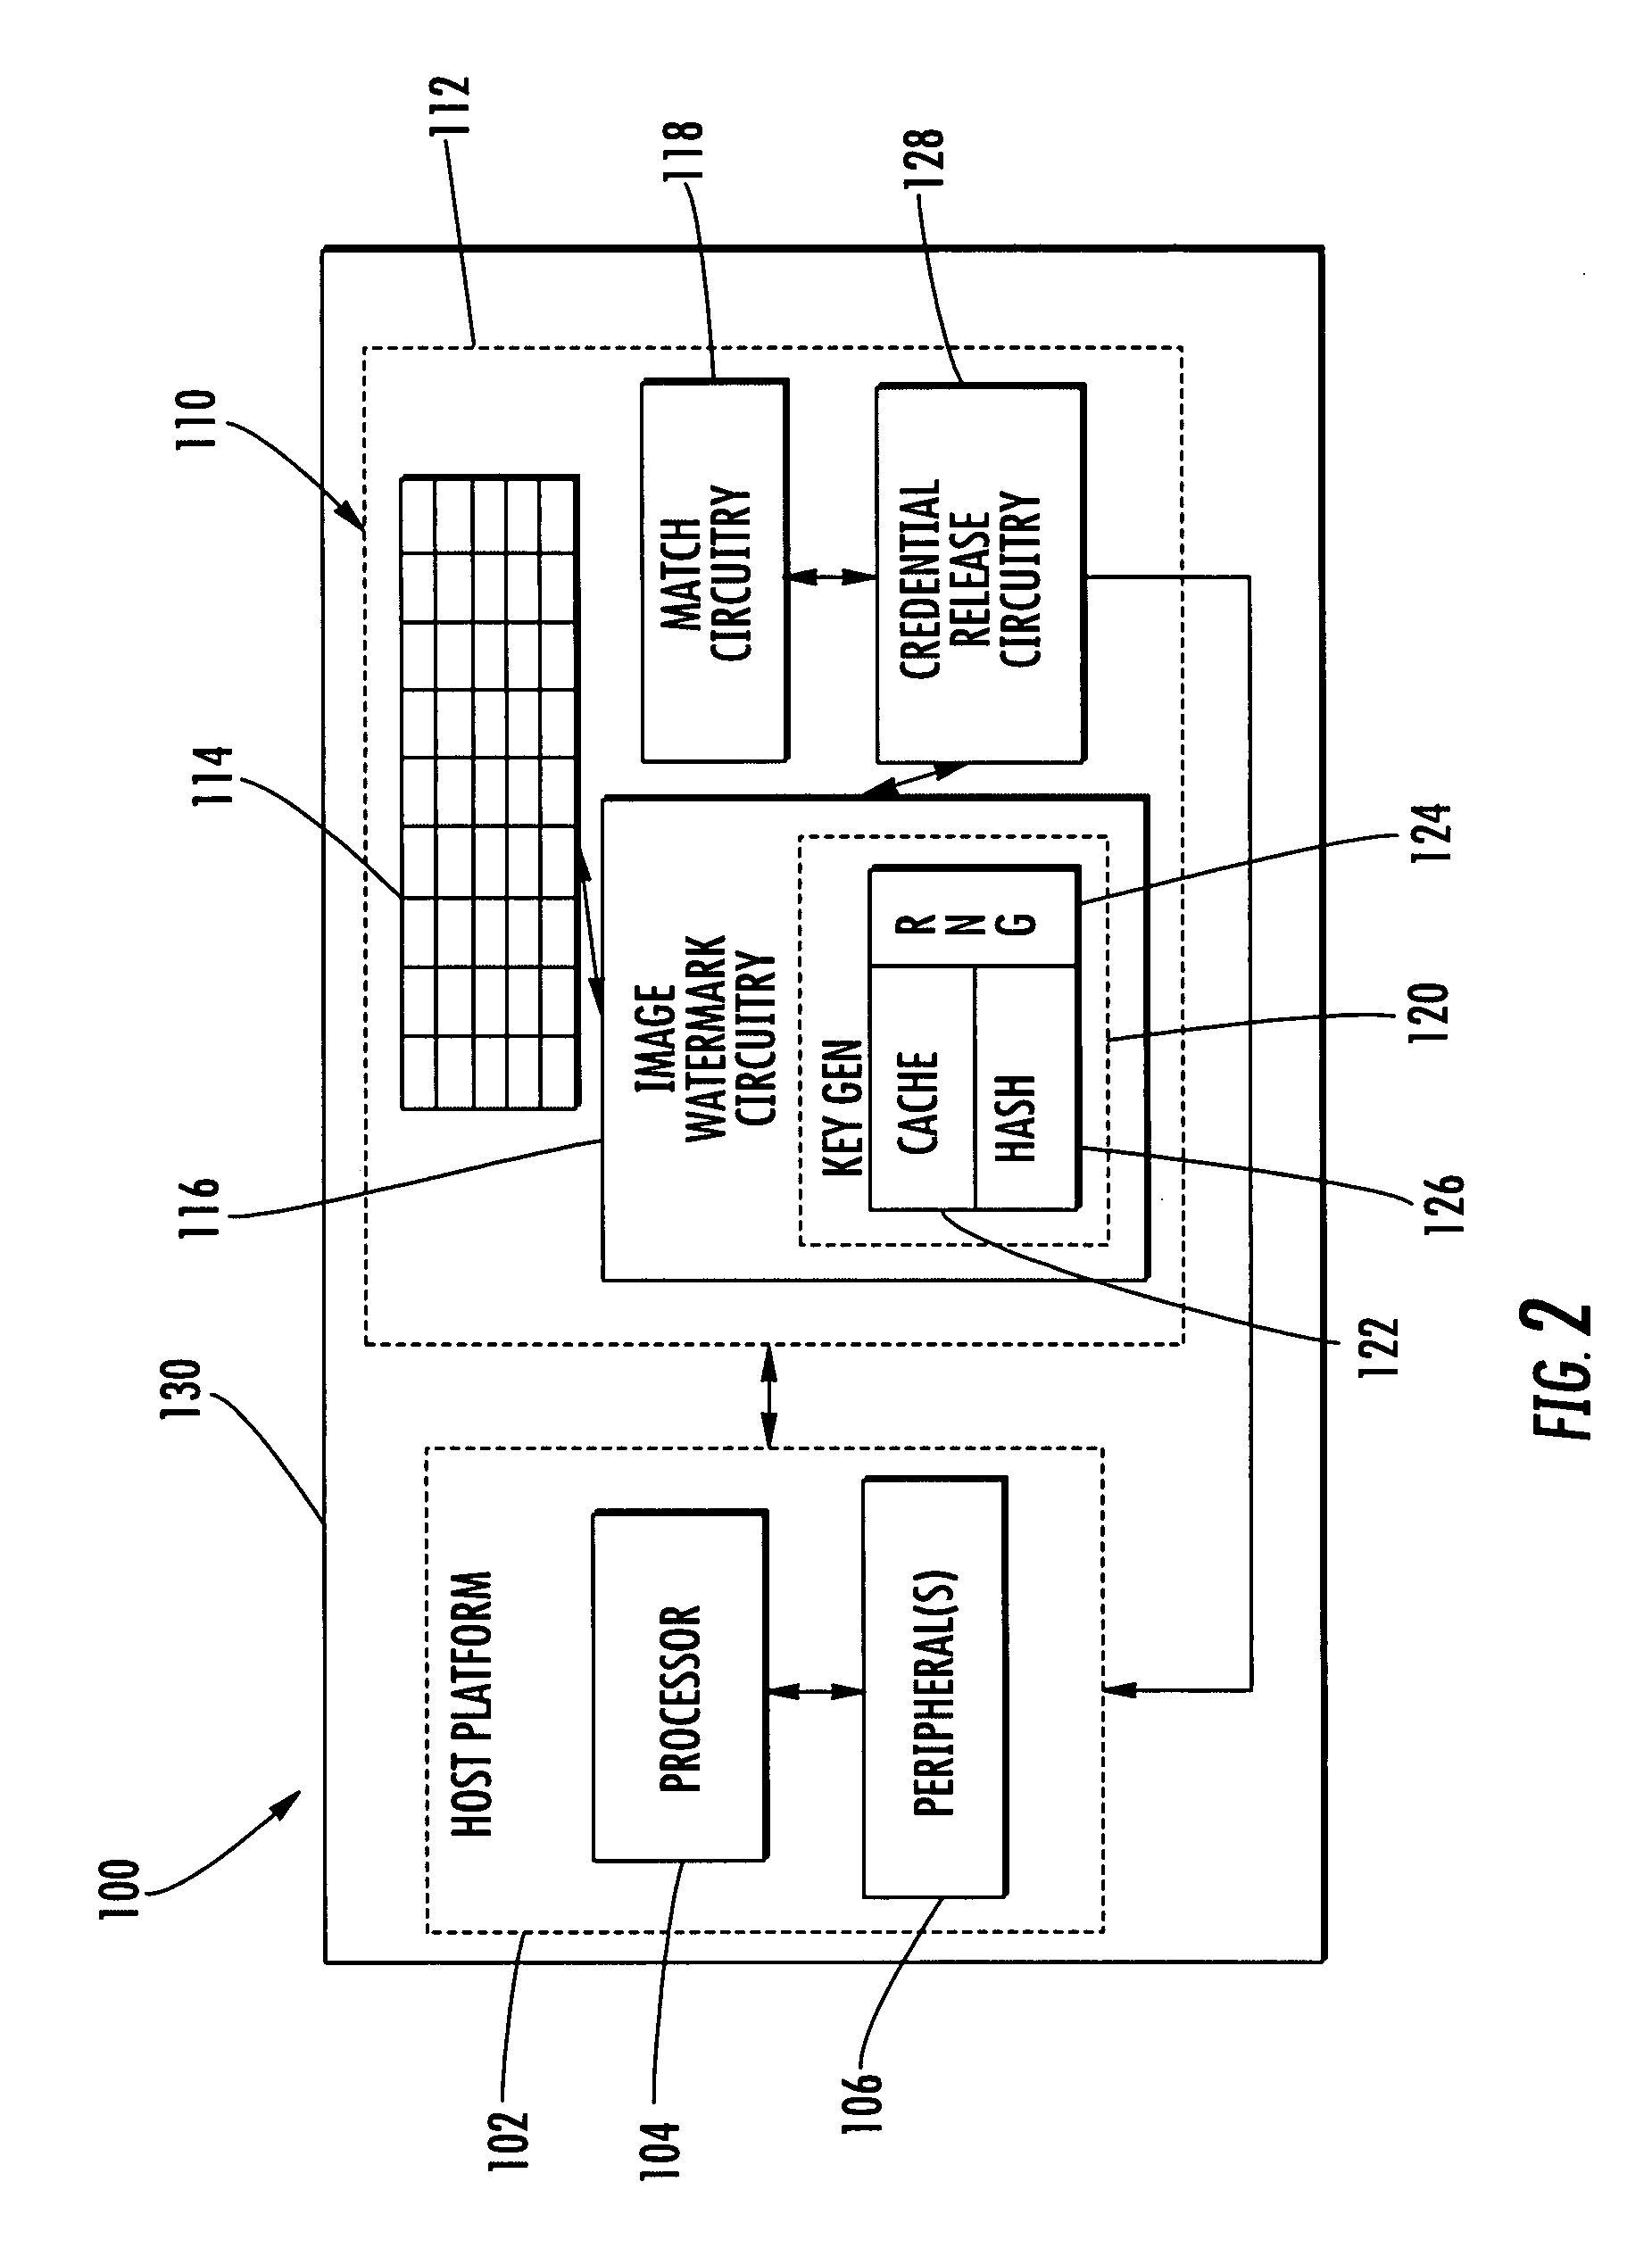 Finger sensing apparatus performing secure software update and associated methods